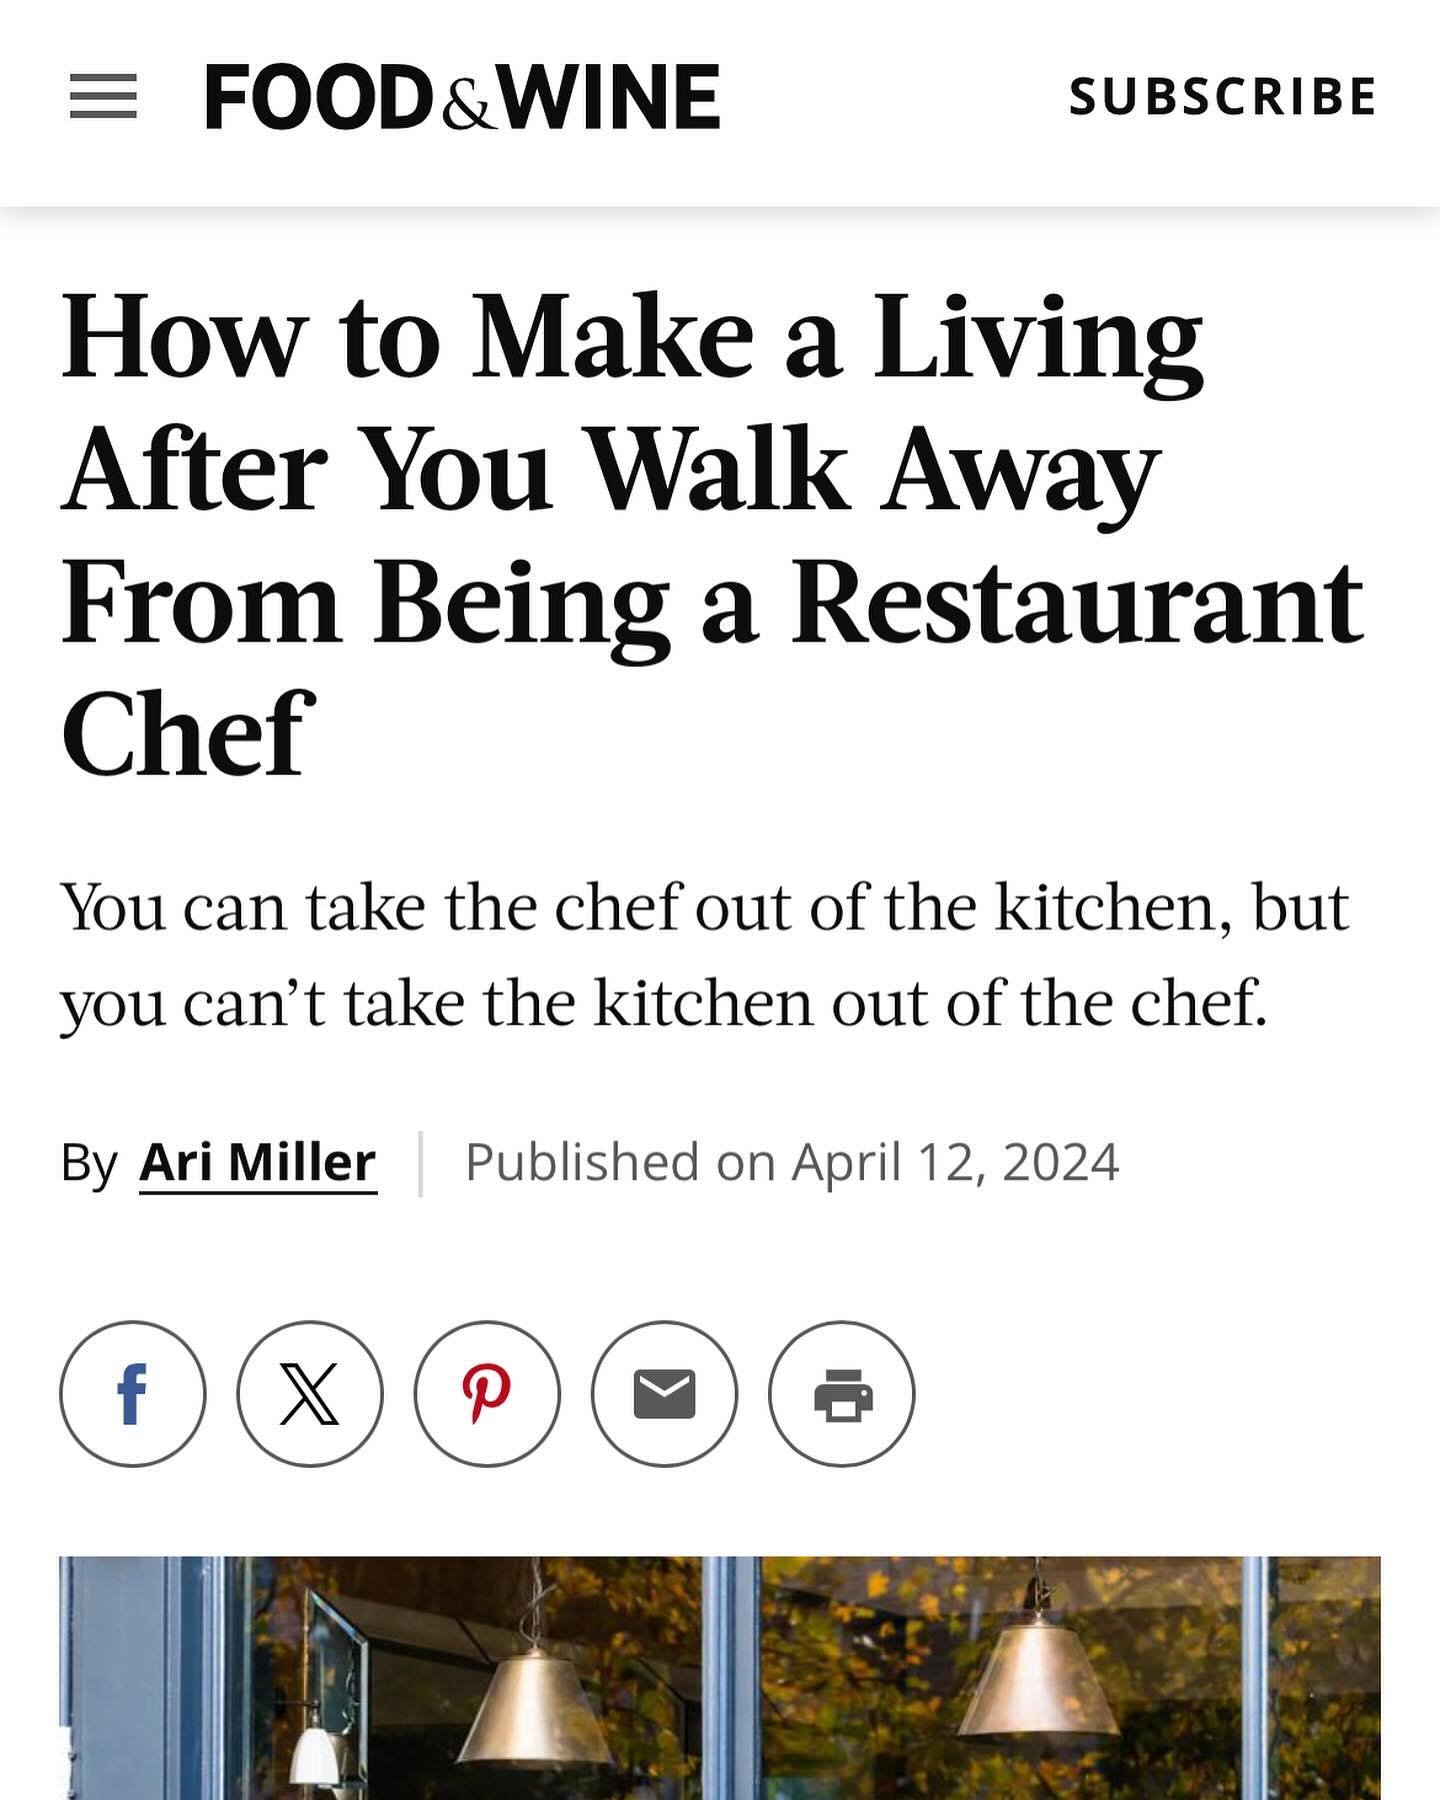 New piece in Food &amp; Wine on what happens after you leave the professional kitchen. I answer the age old question, &ldquo;if you take the chef out of the kitchen can you take the kitchen out of the chef?&rdquo; The answer is no, you cannot.

Thank